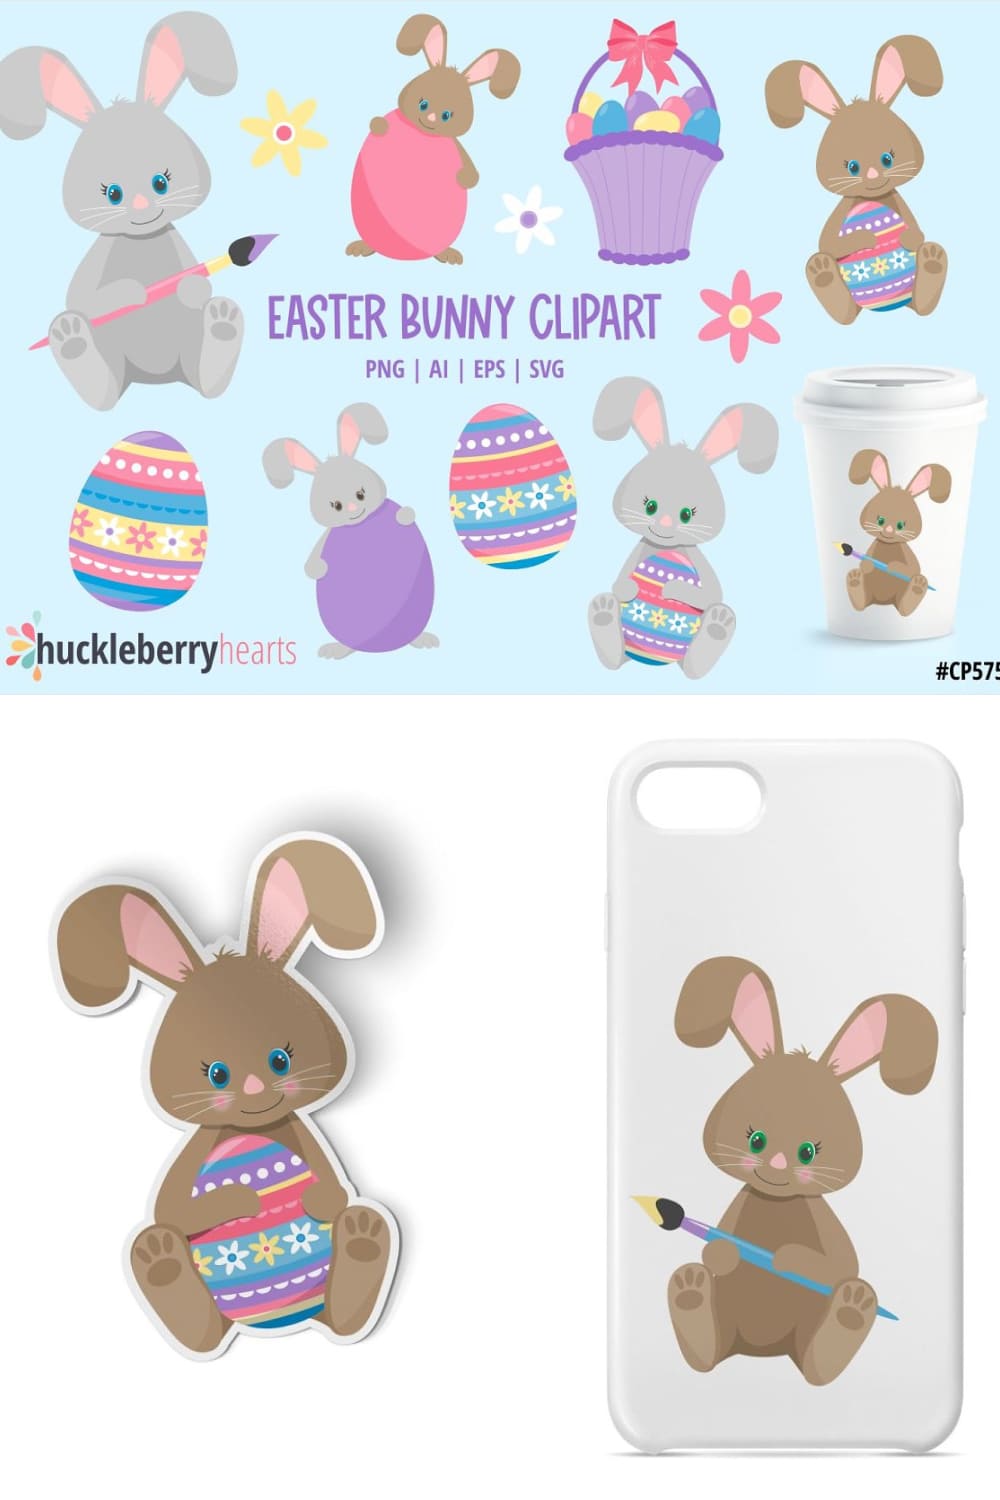 Easter bunny clipart, picture for pinterest 1000x1500.